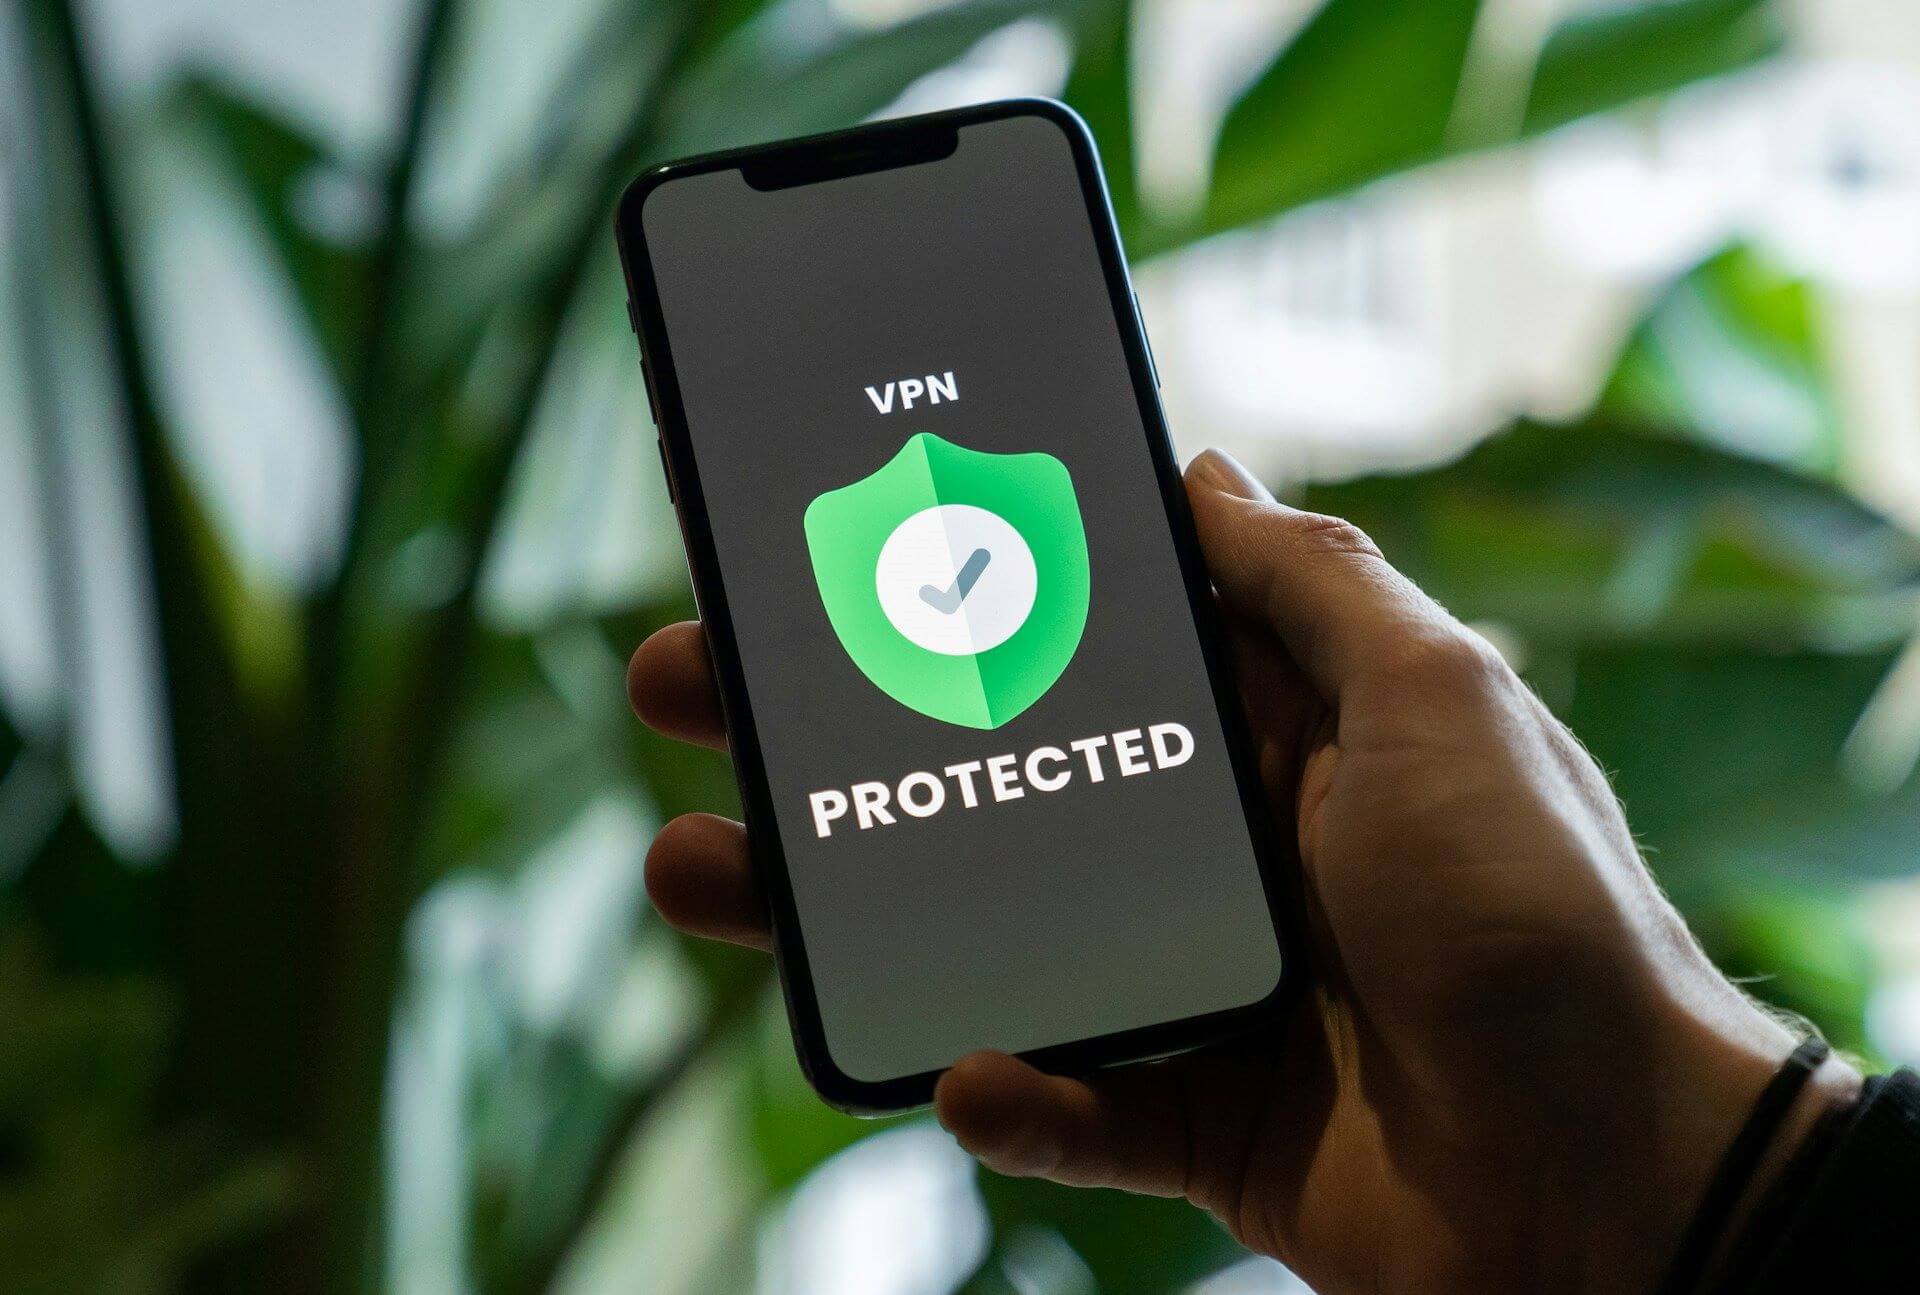 Image of personal information protection: A green shield mark on a smartphone screen.